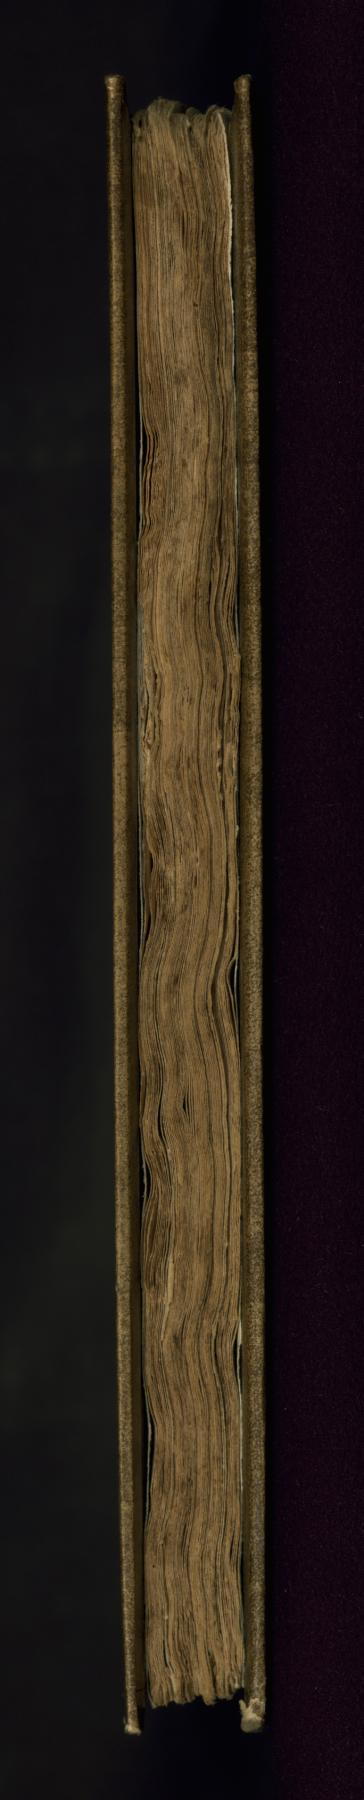 Image for Binding from Glossed copy of Eberhard of Bethune's Graecismus